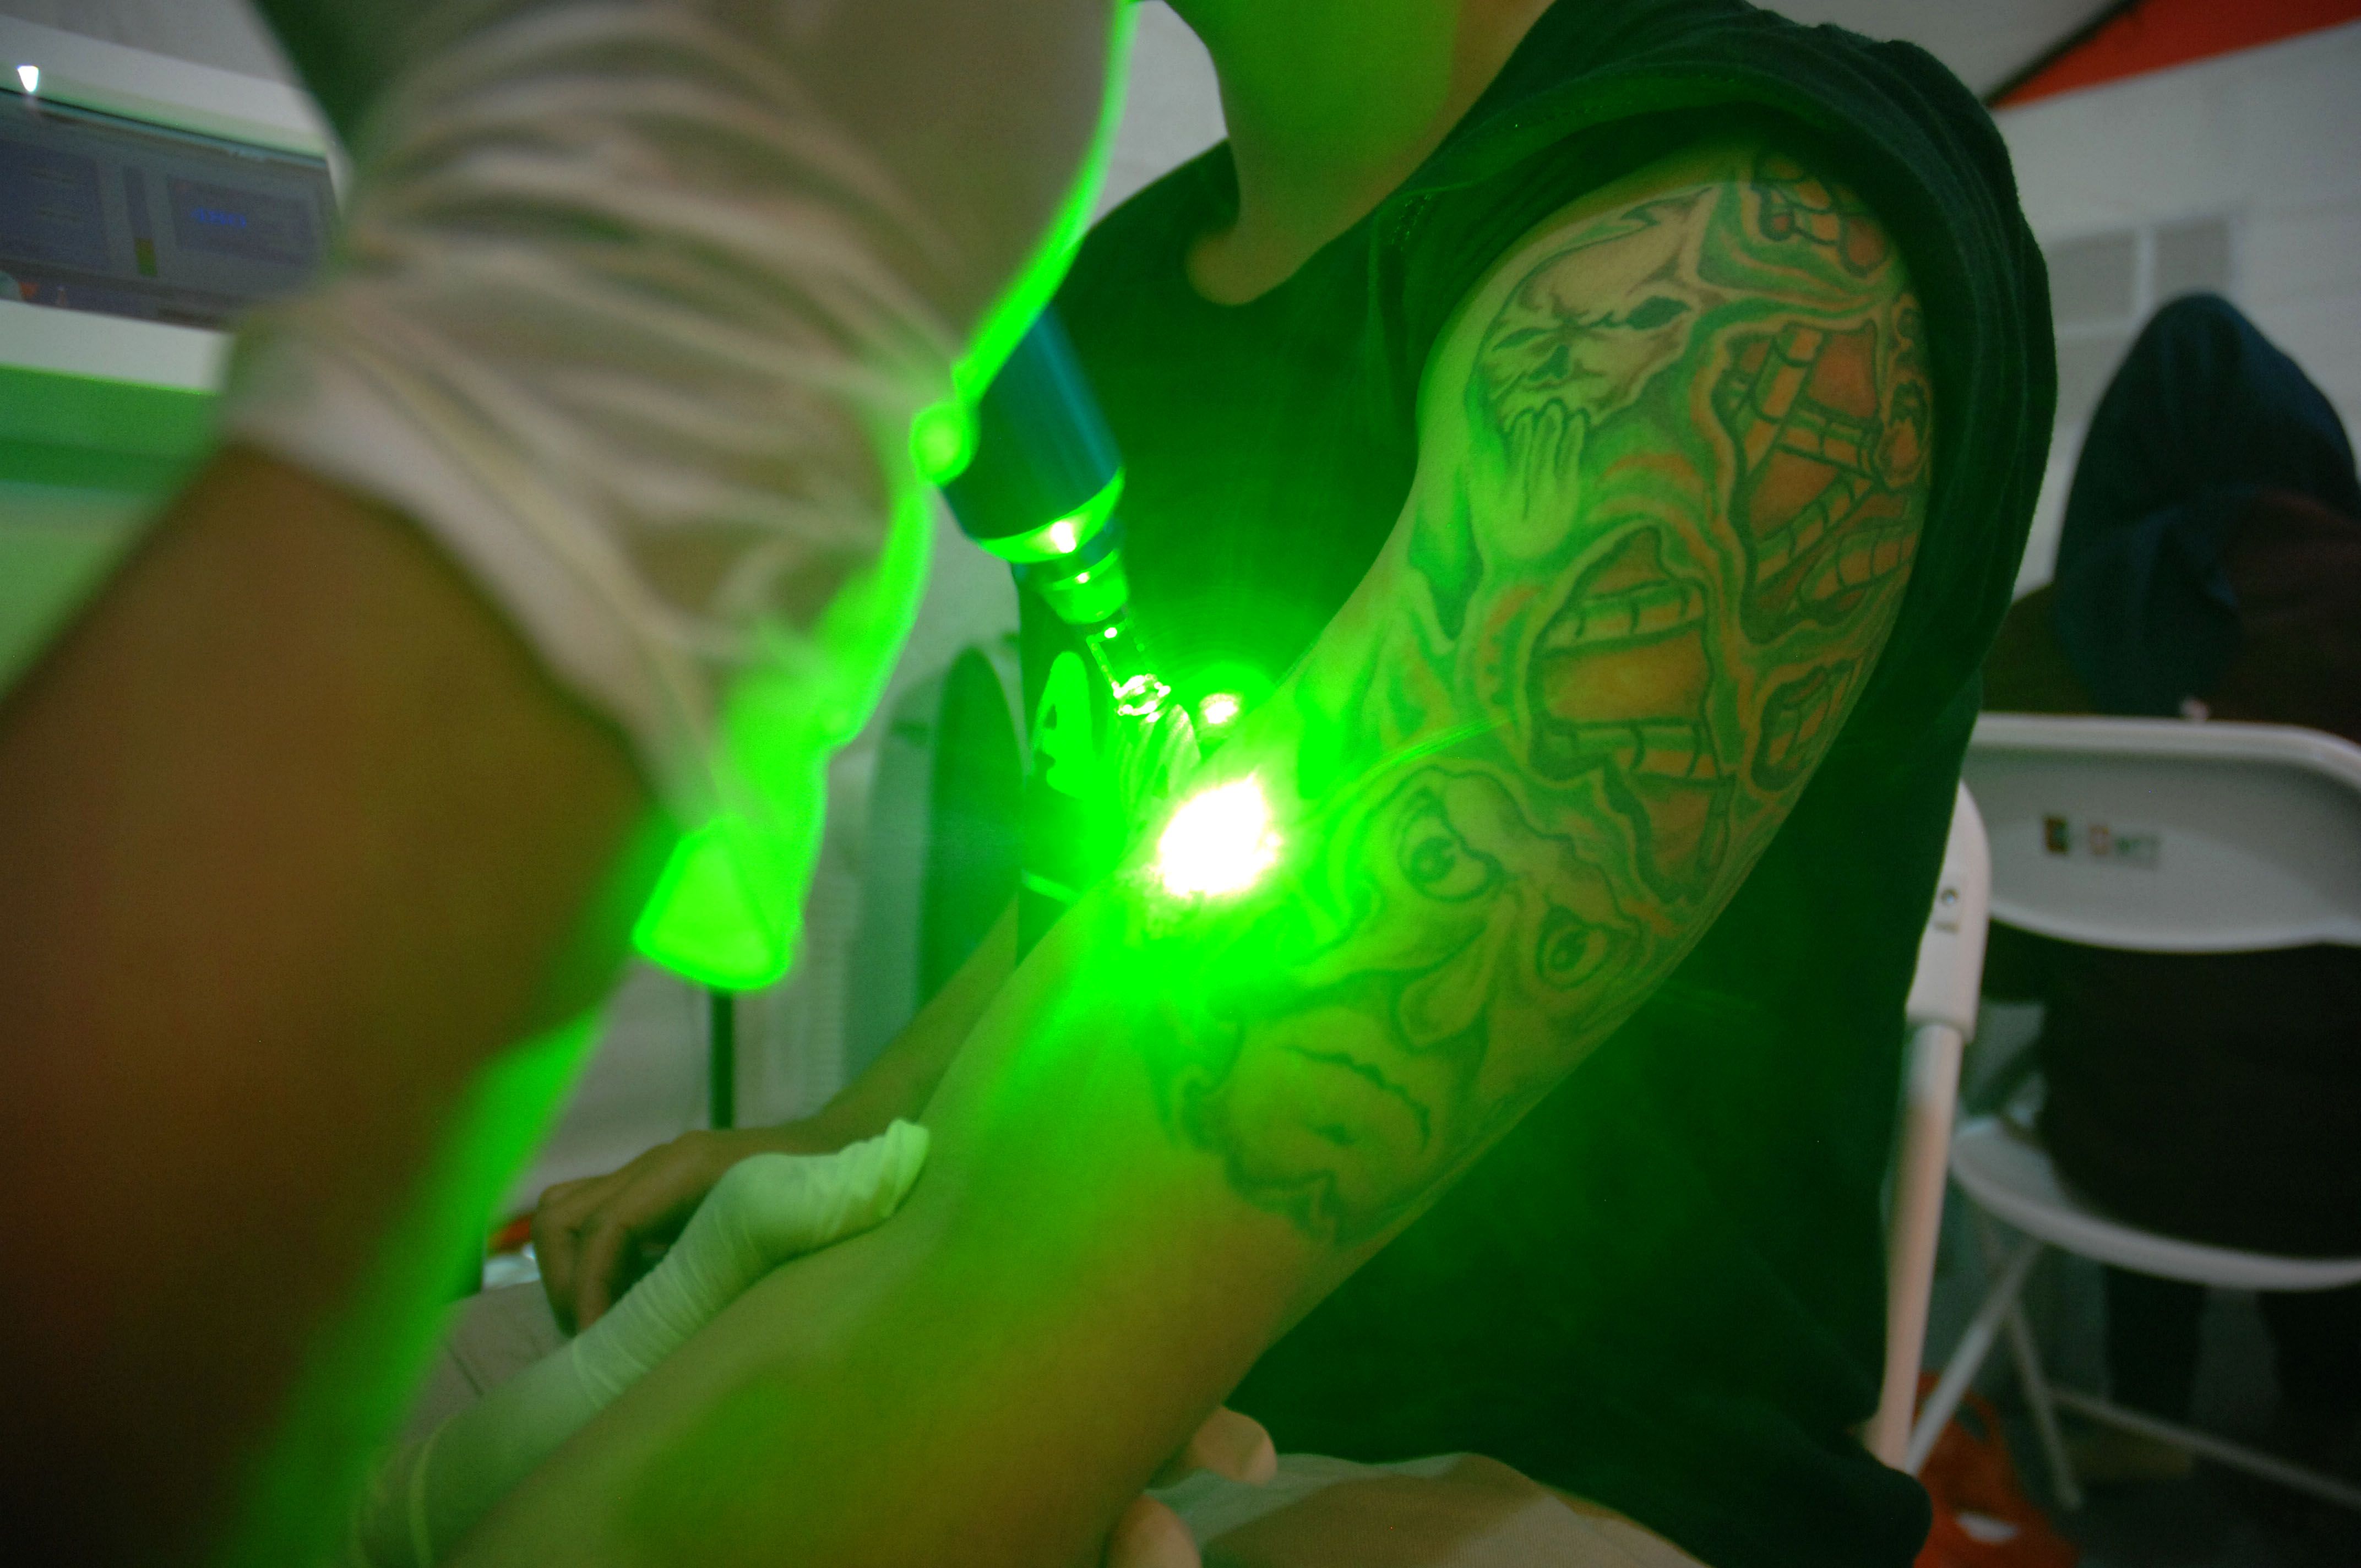 Tattoo Removal Los Angeles  Laser Tattoo Removers